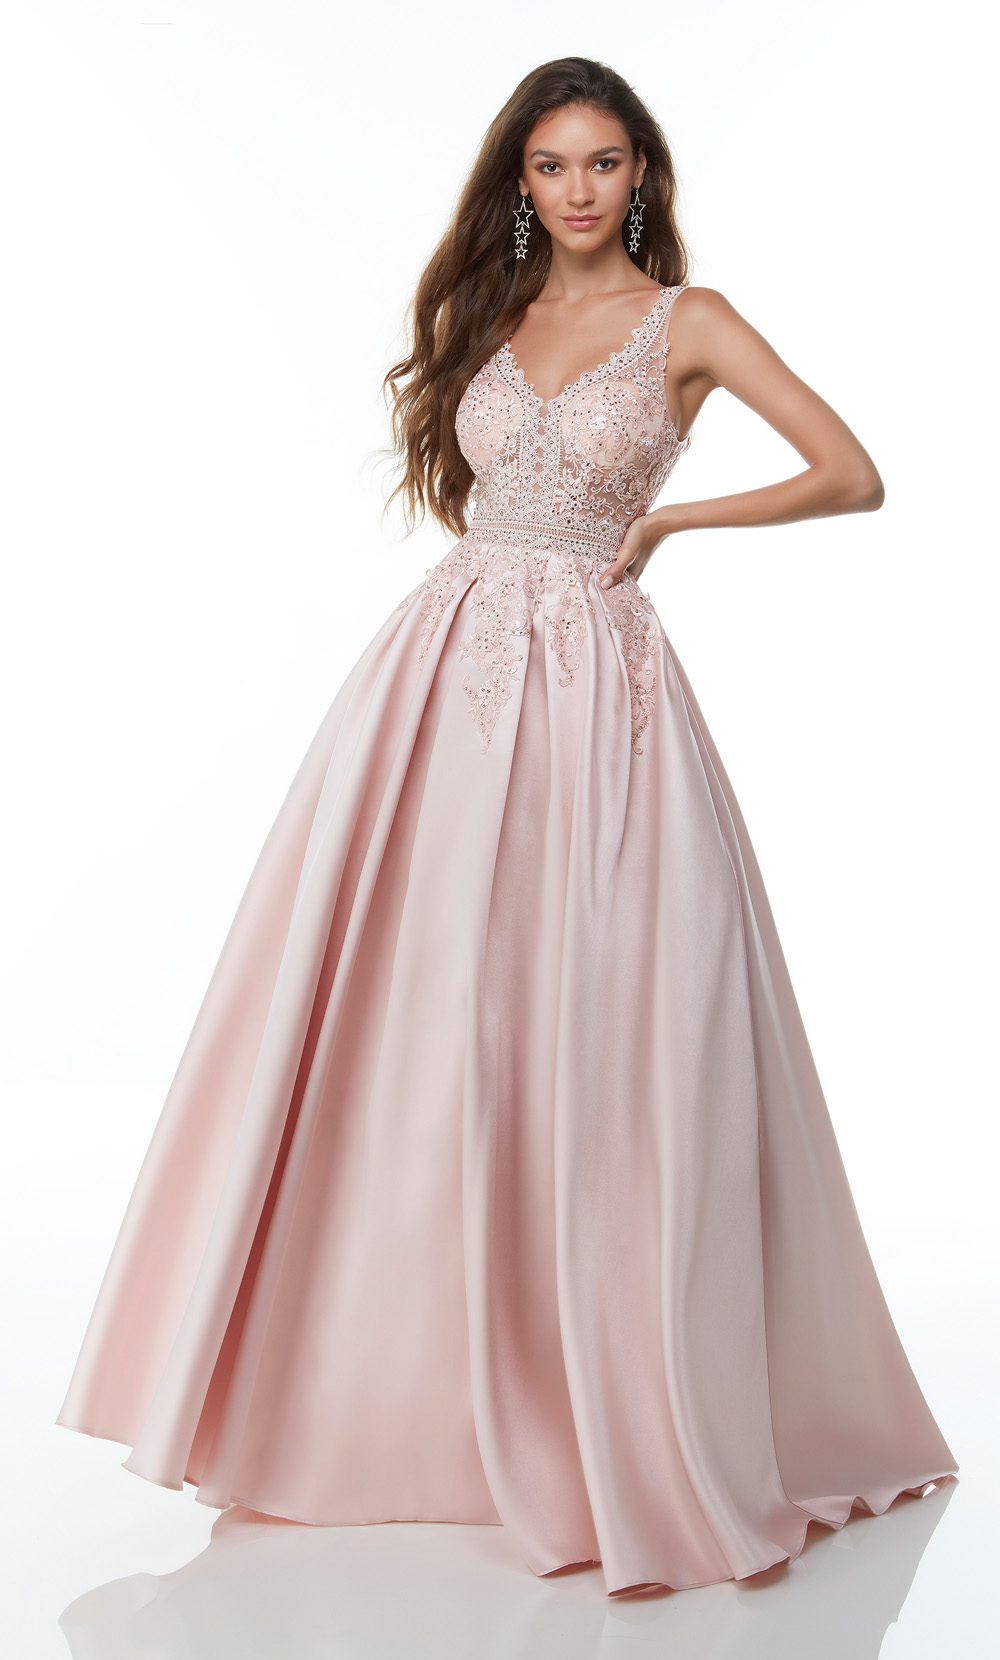 The French Pink Gown